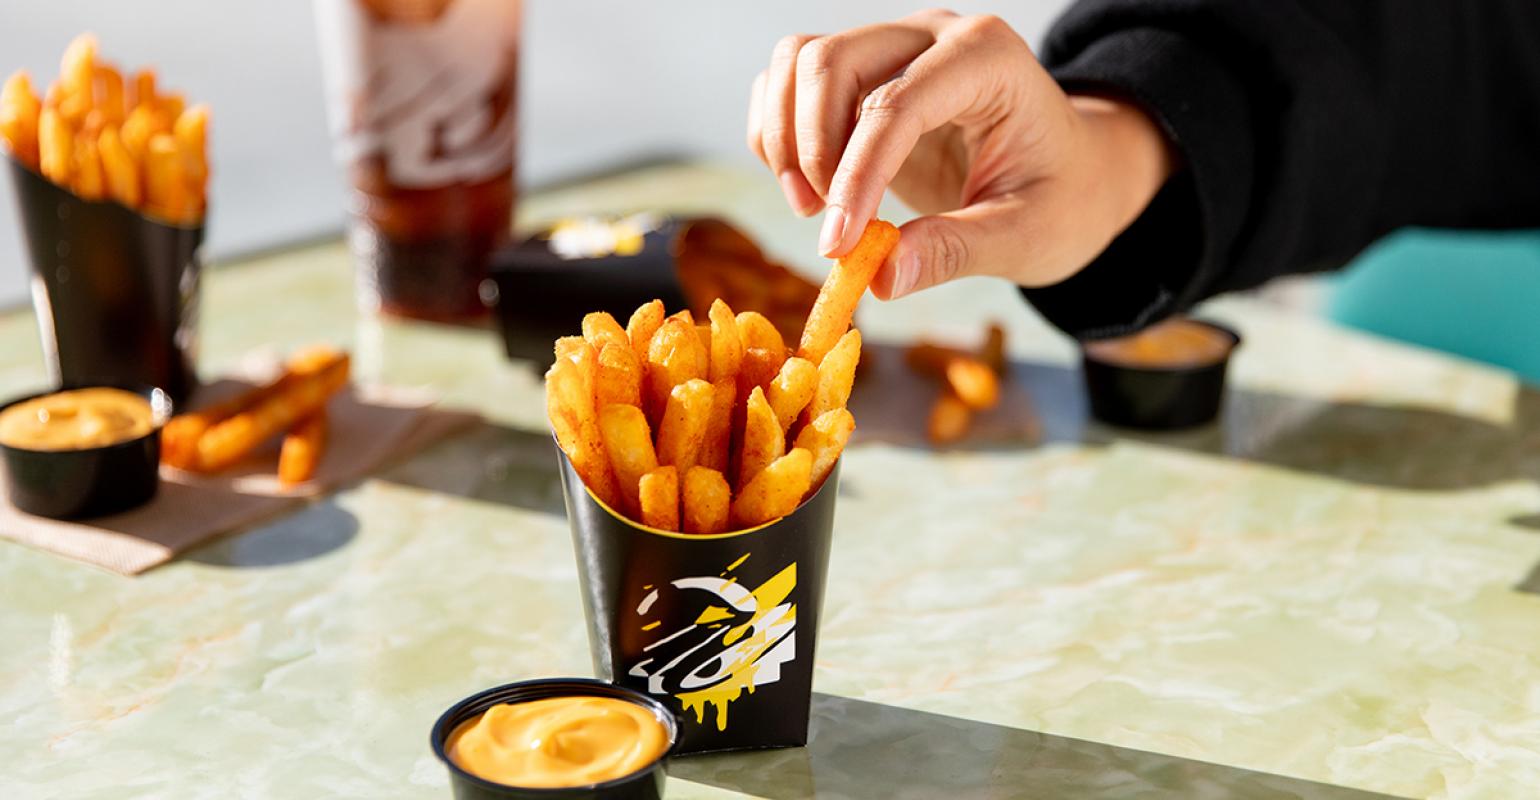 Taco Bell to bring back Nacho Fries on Jan. 31 Nation's Restaurant News